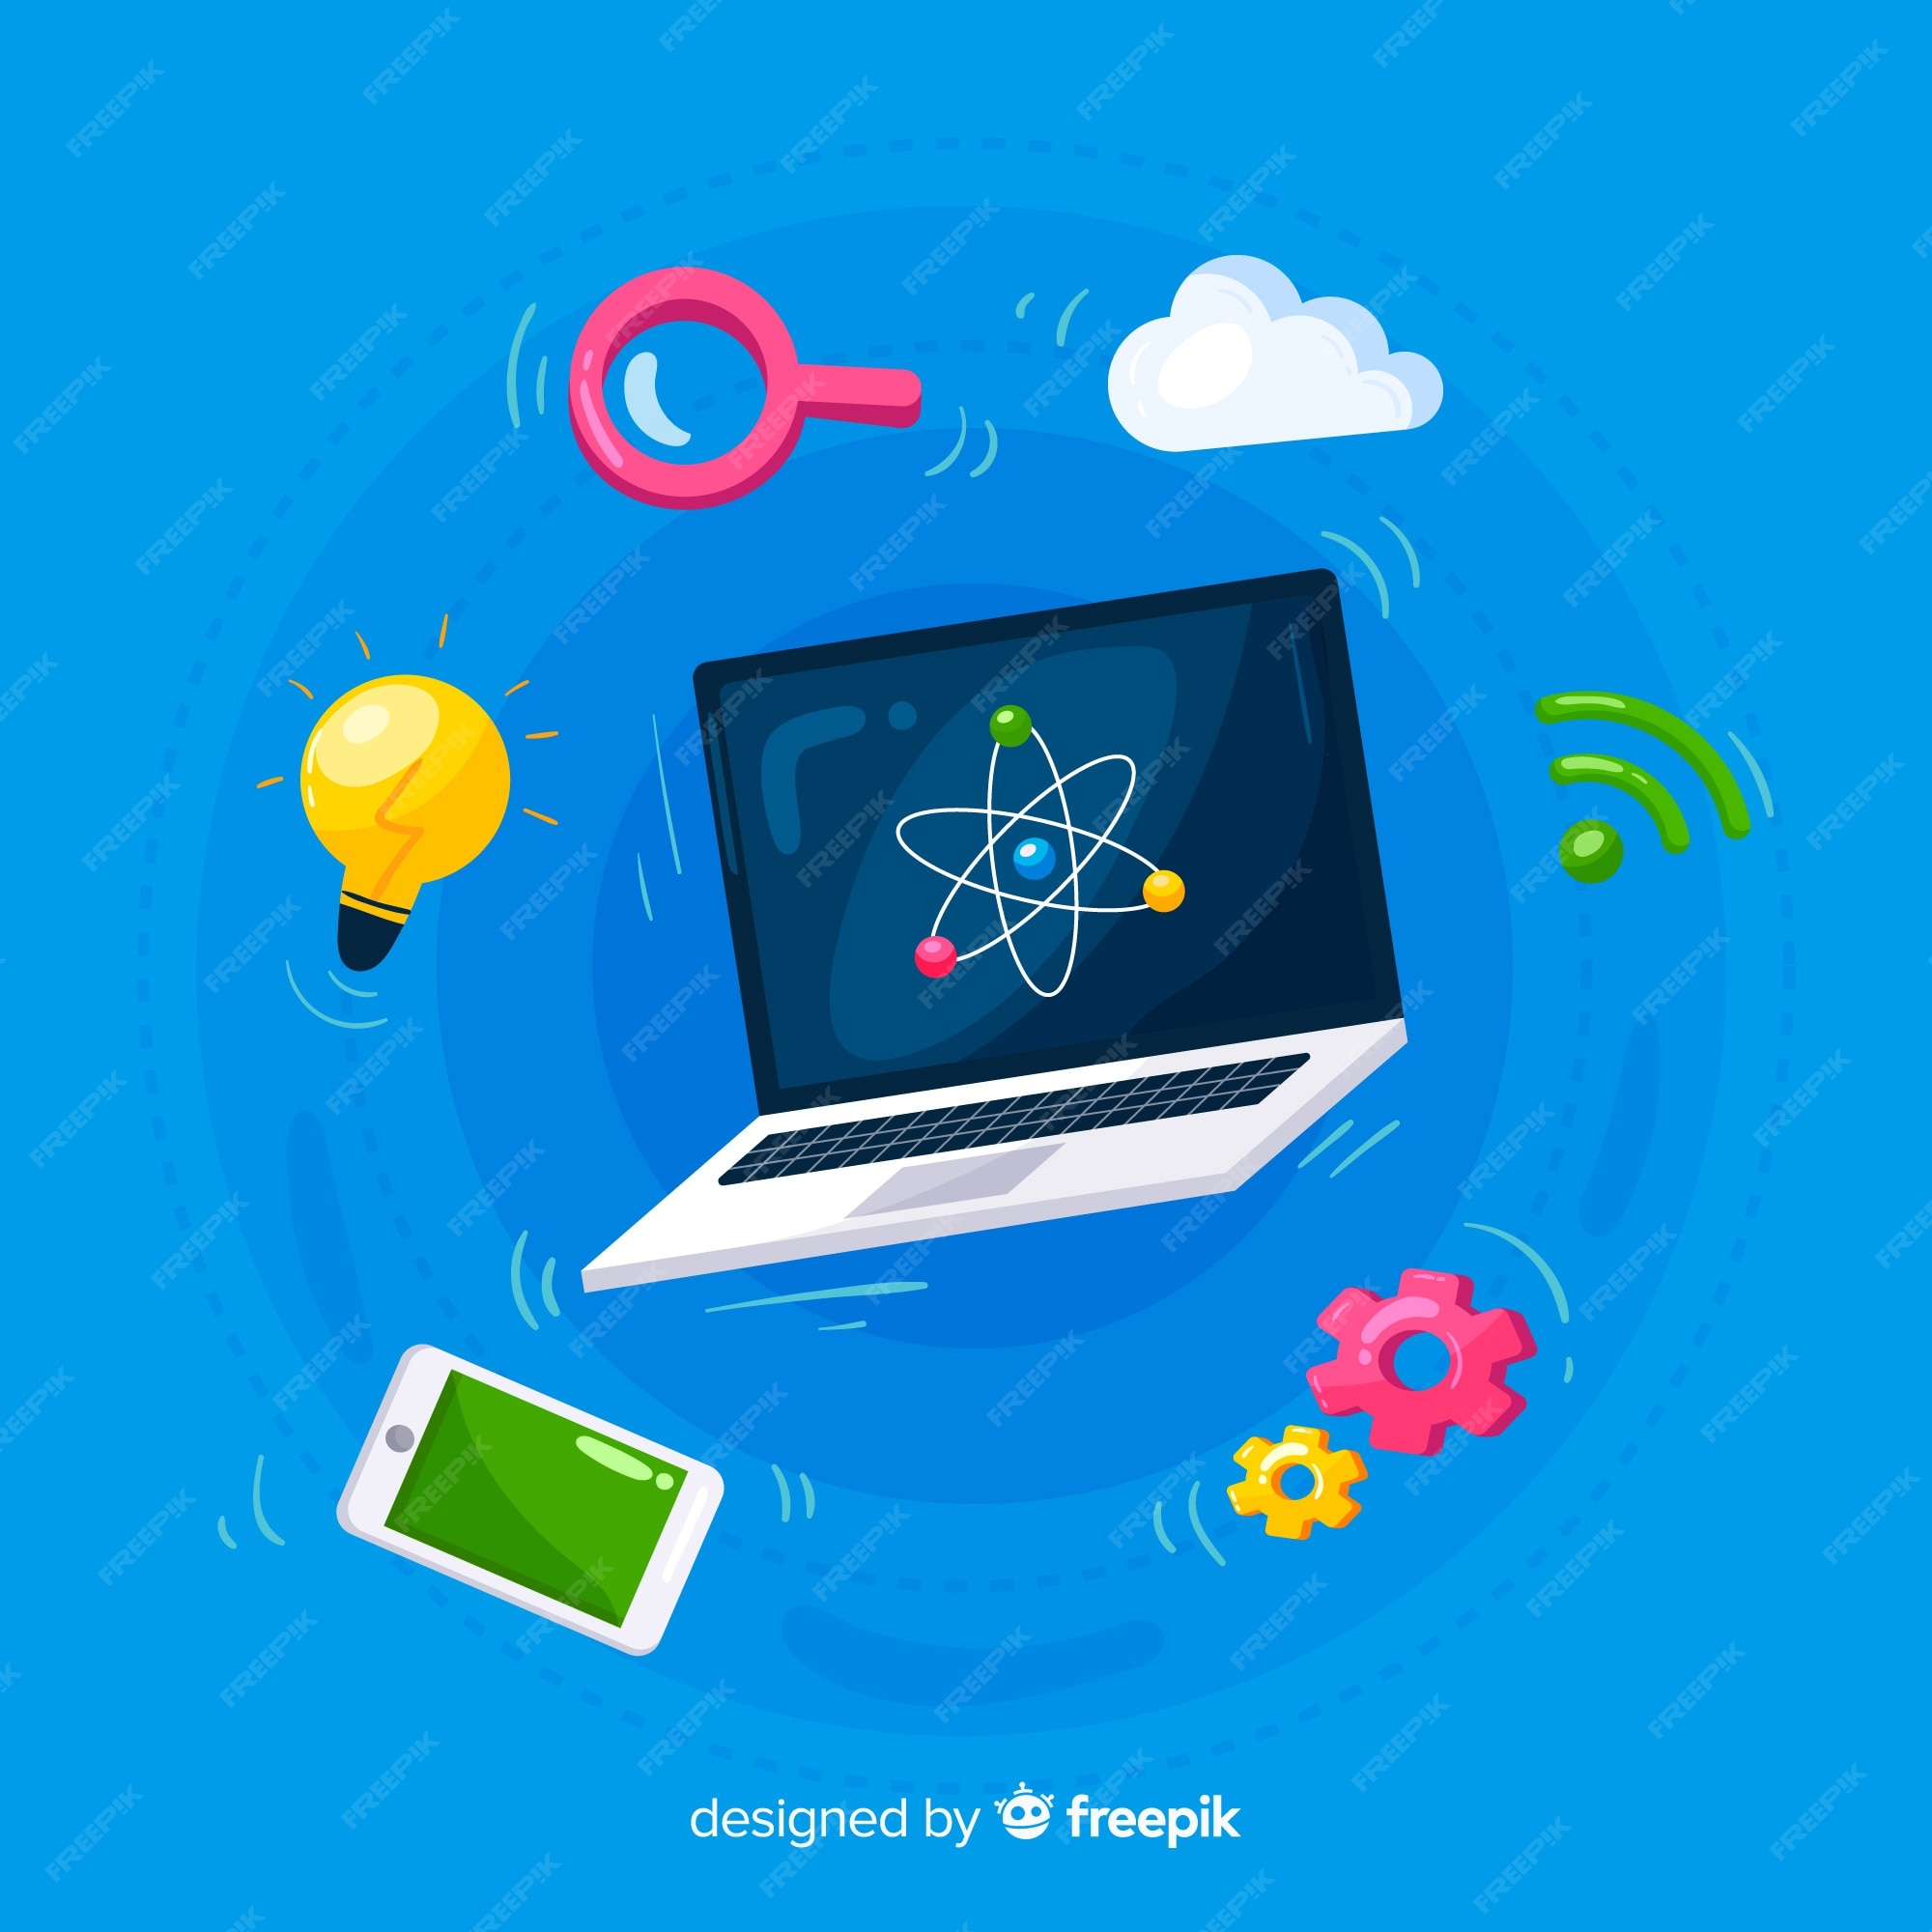 Computer Science Images - Free Download on Freepik